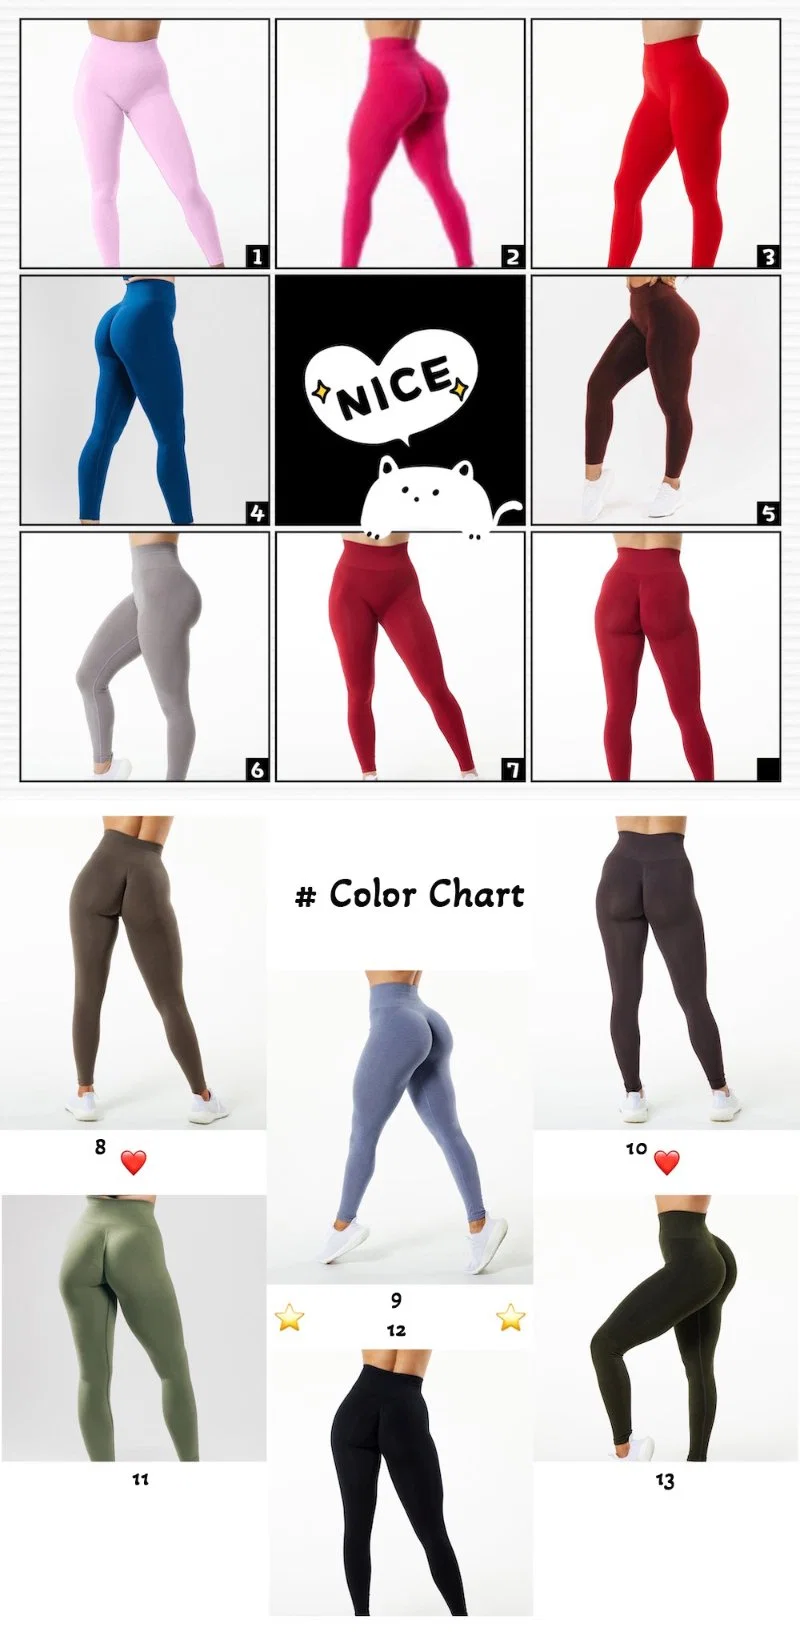 Hot Selling 5PCS Set Sports Fitness Sweat Suits Seamless Compression Gym Clothes for Women, Custom Logo Gym Top + Yoga Shorts + Workout Leggings Active Apparel